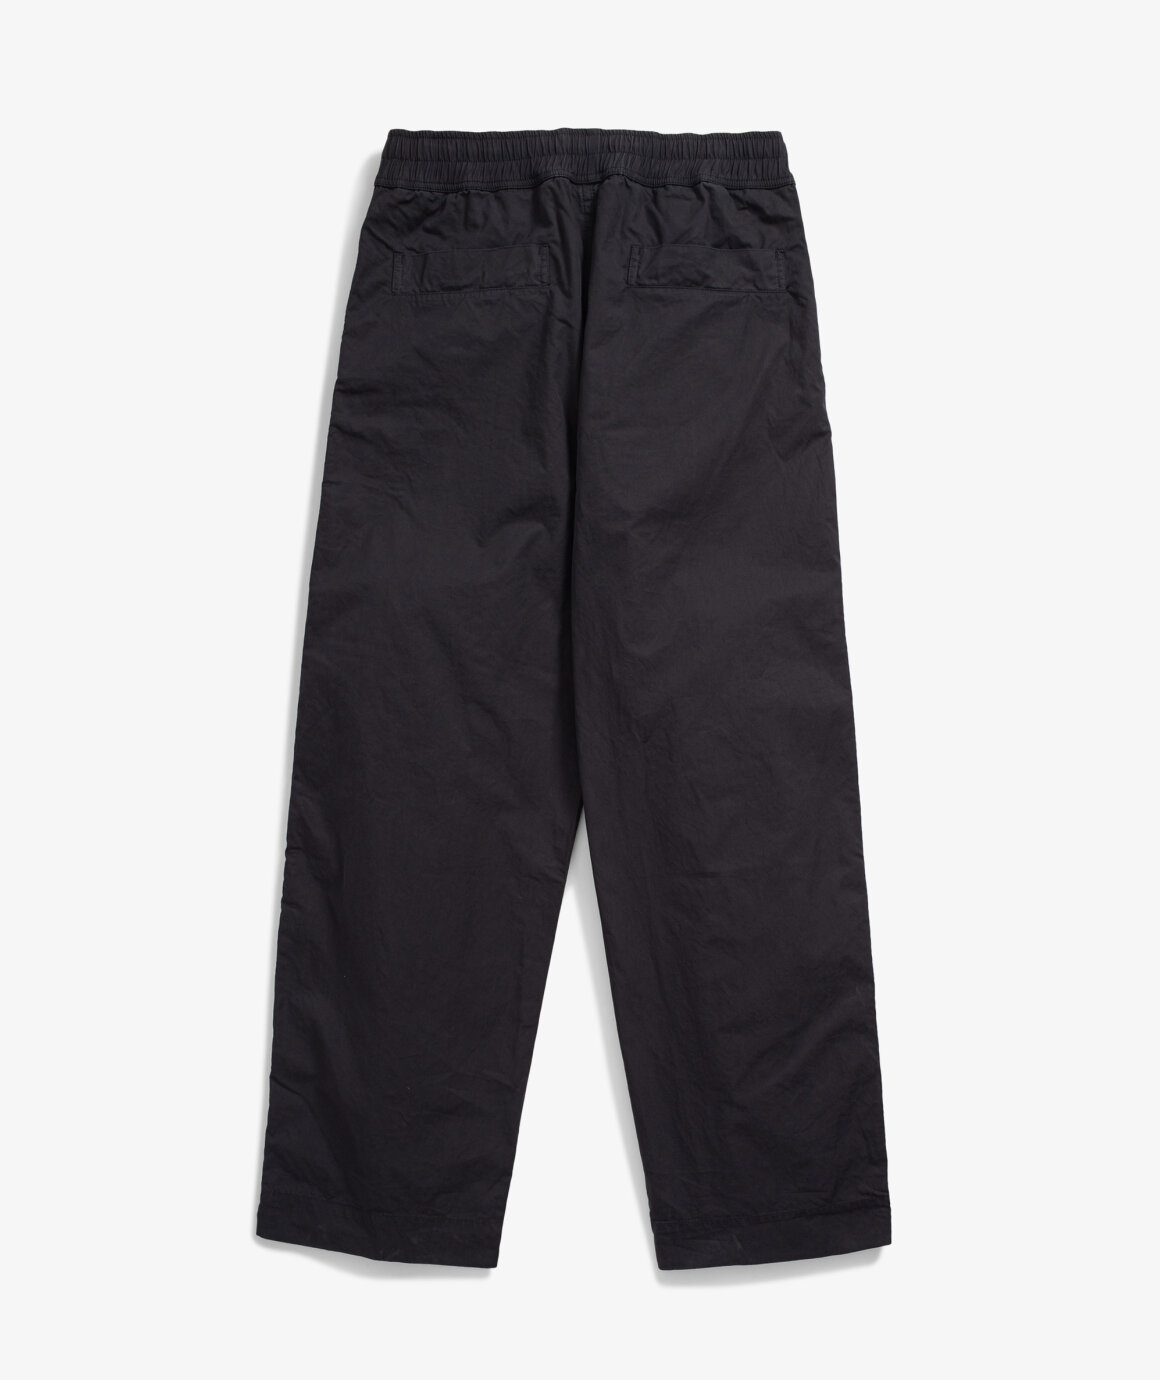 Norse Store | Shipping Worldwide - Margaret Howell MHL Cargo Jogger ...